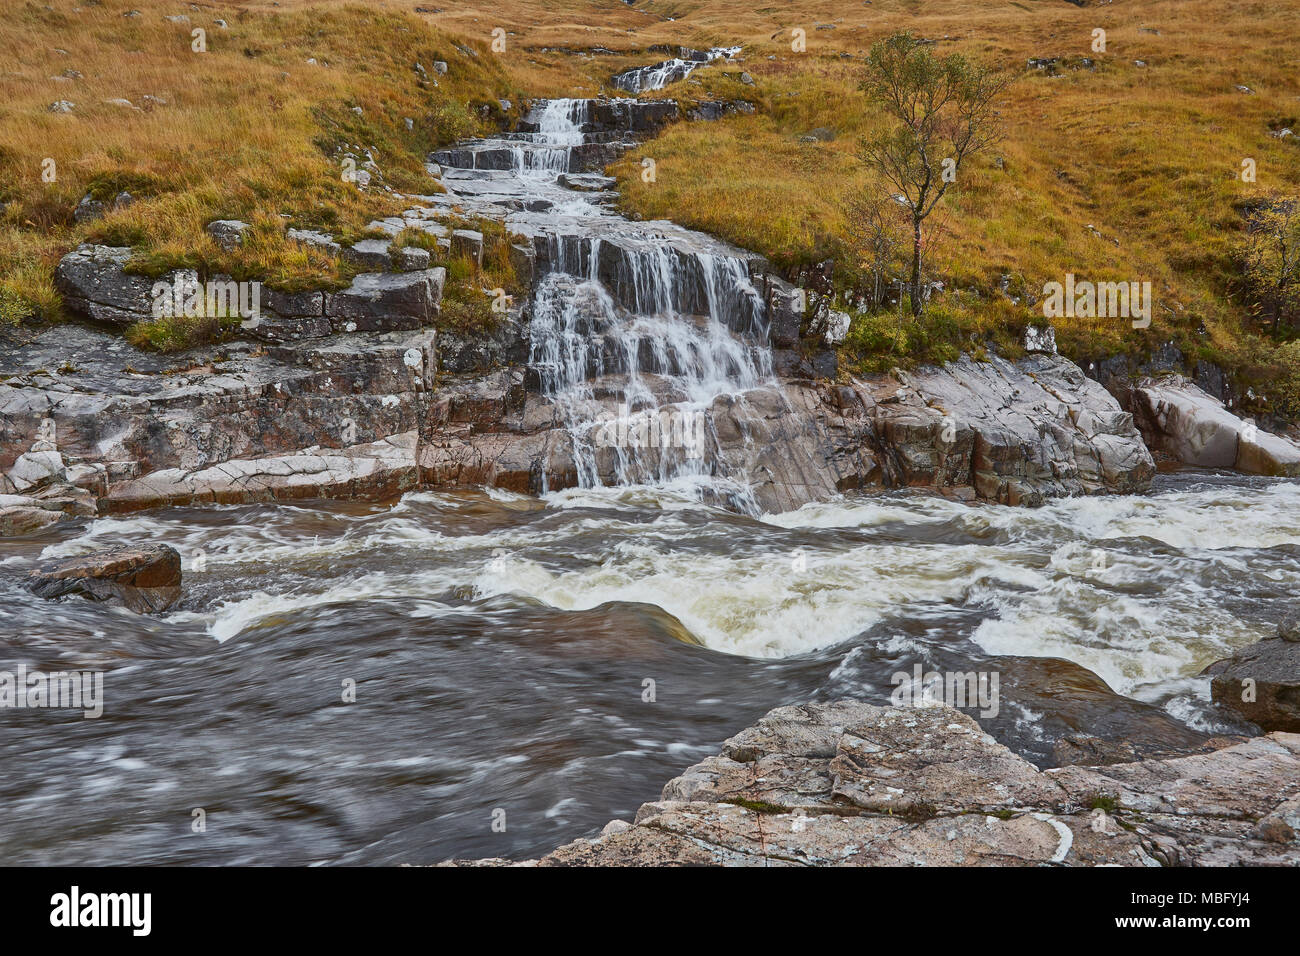 A stream of water flowing over rocks into a fast moving river below, Scottish Highlands, Scotland, UK Stock Photo